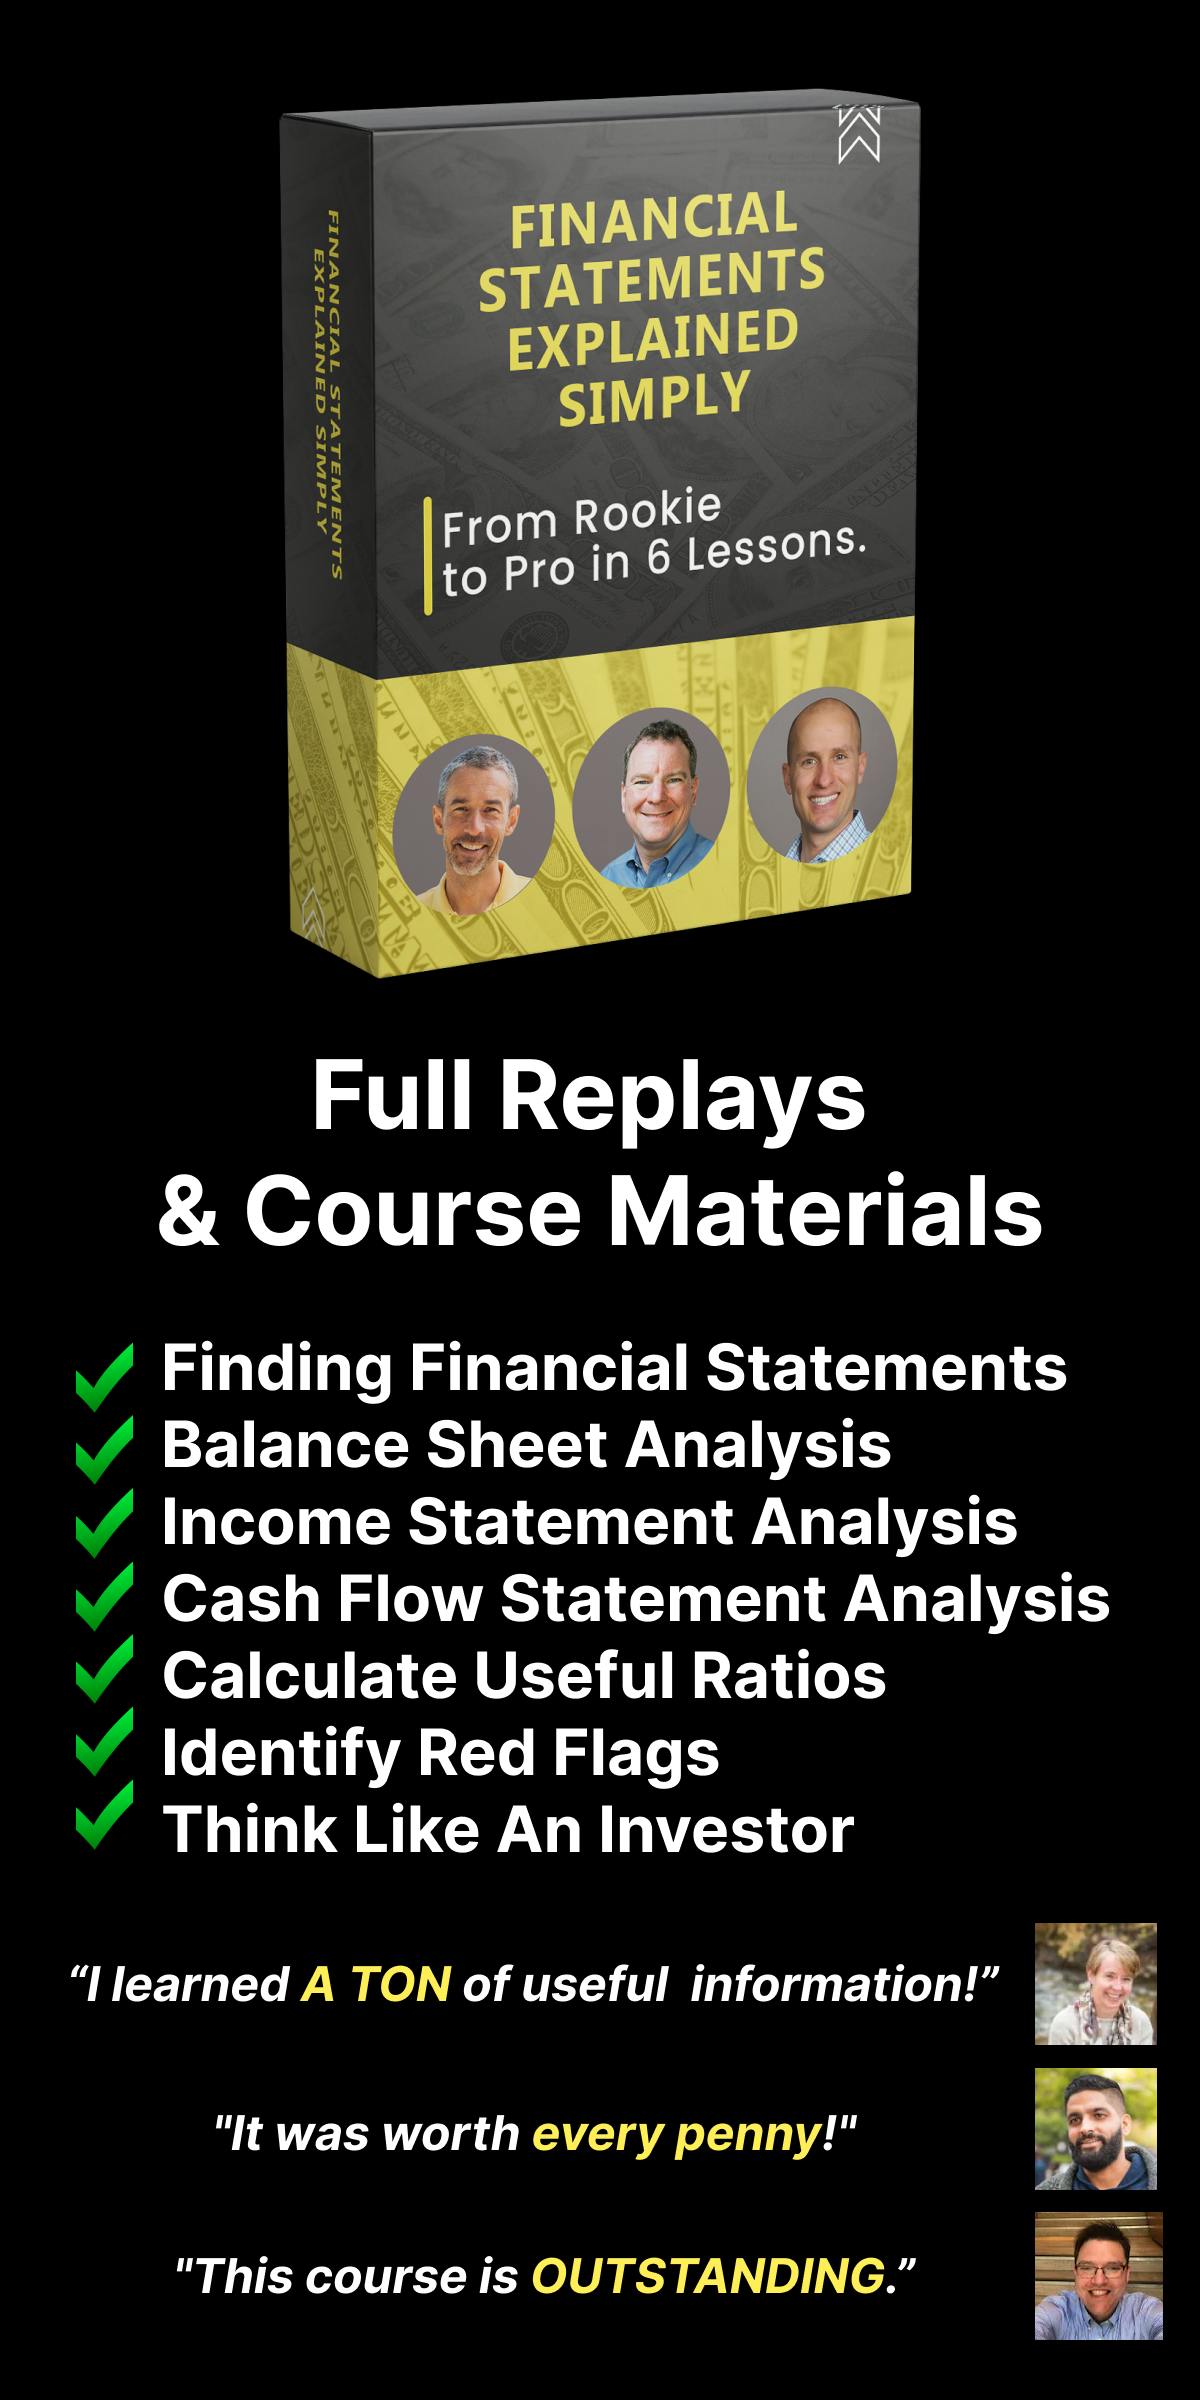 Financial Statements Explained Simply - Course Replays